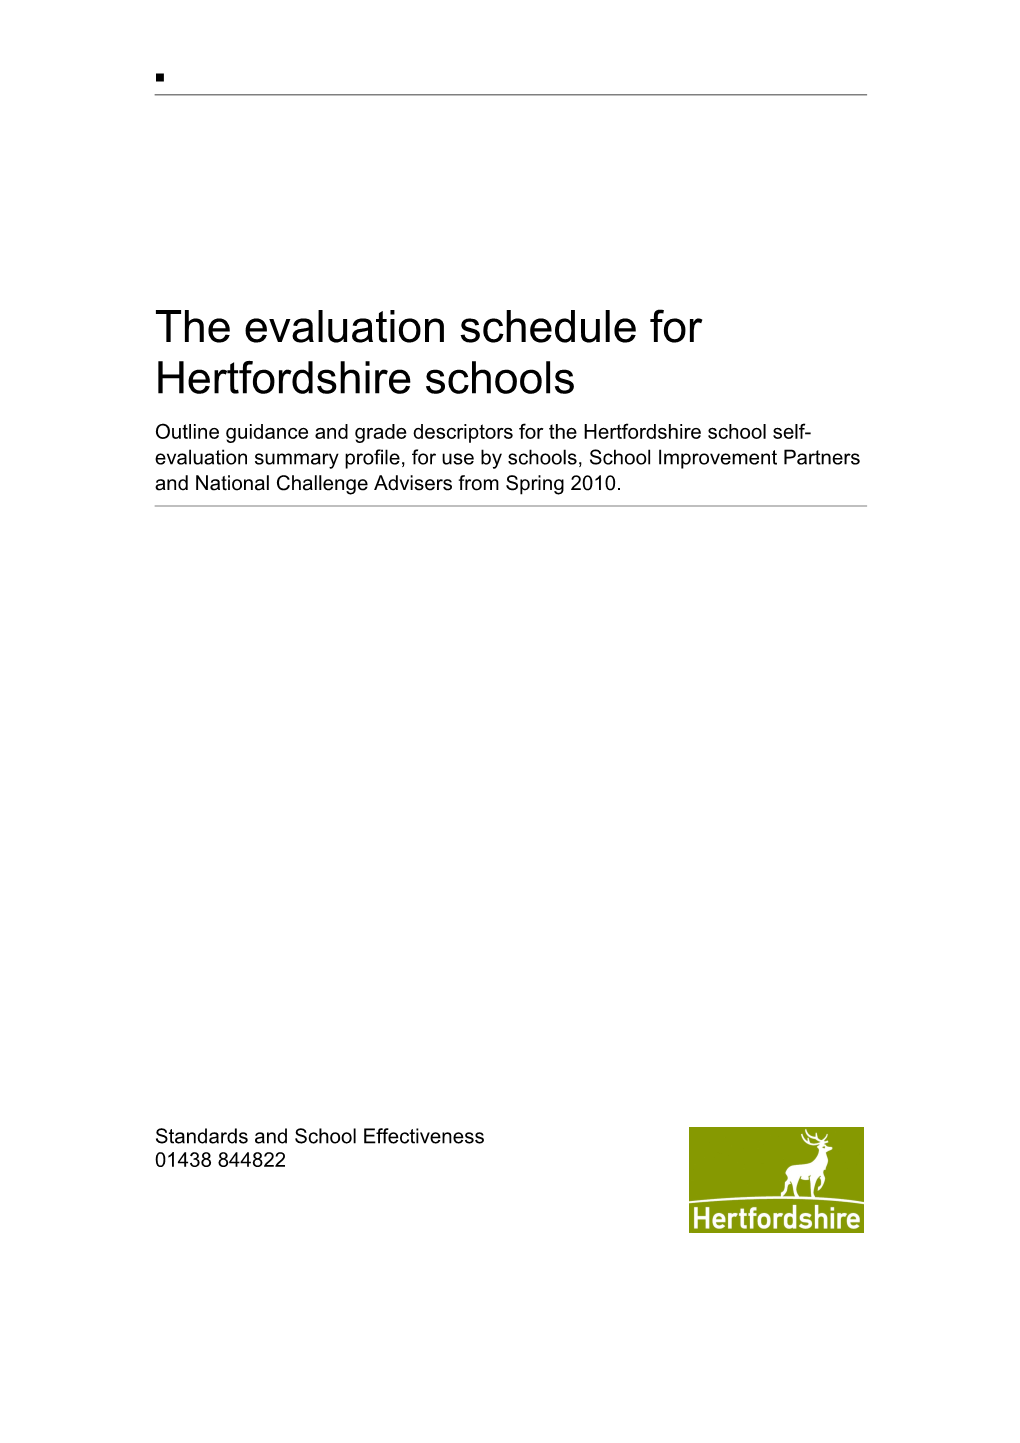 The Evaluation Schedule for Hertfordshire Schools